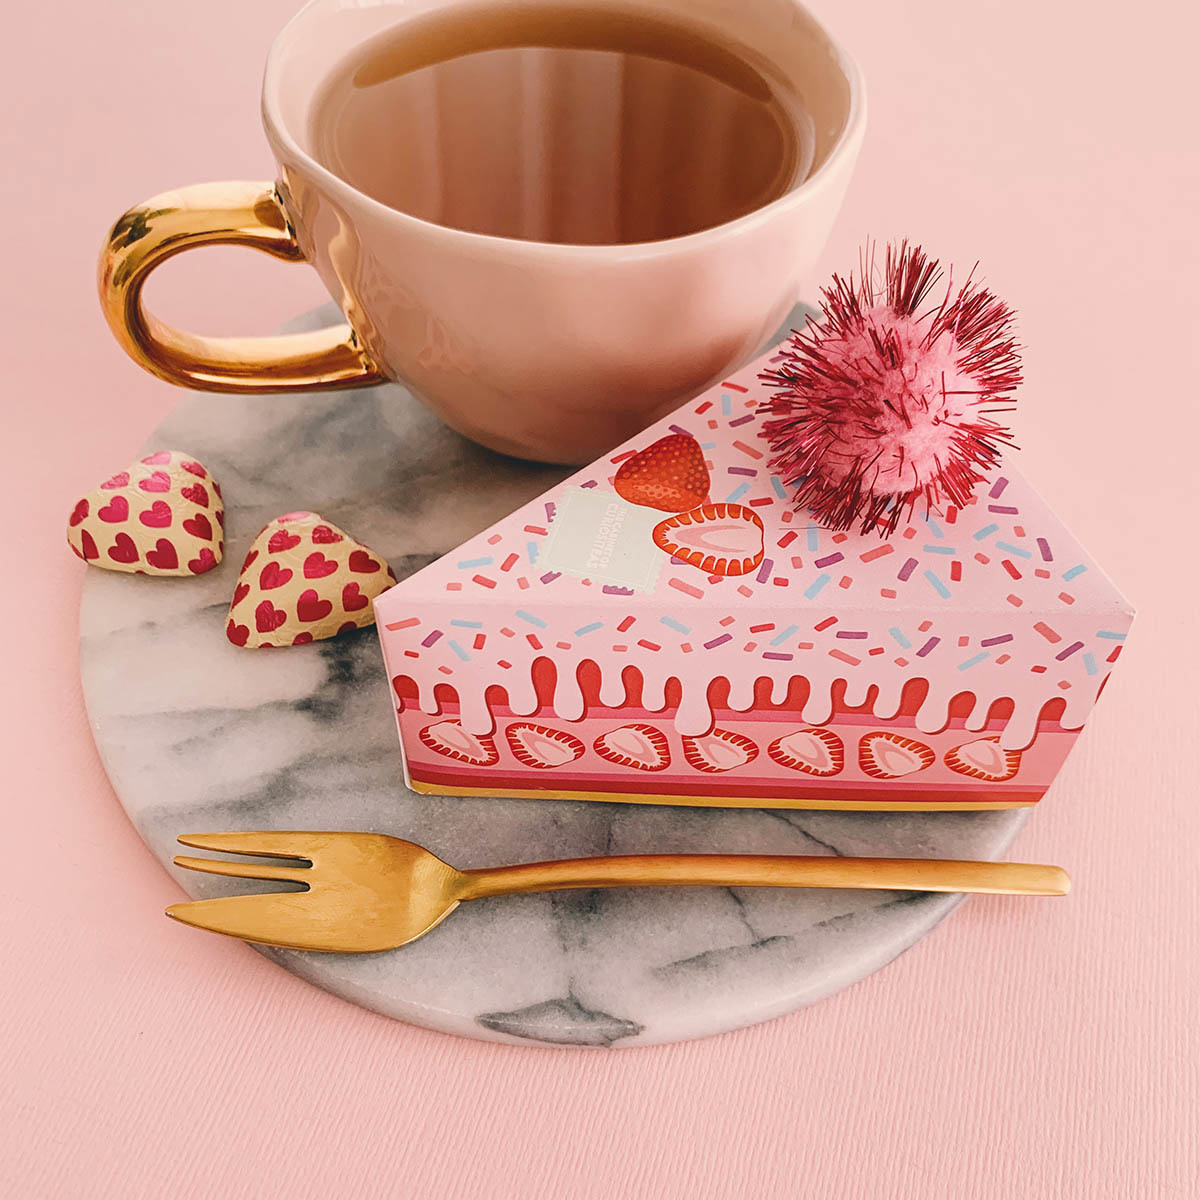 Cup and Cake - Handmade Canberra